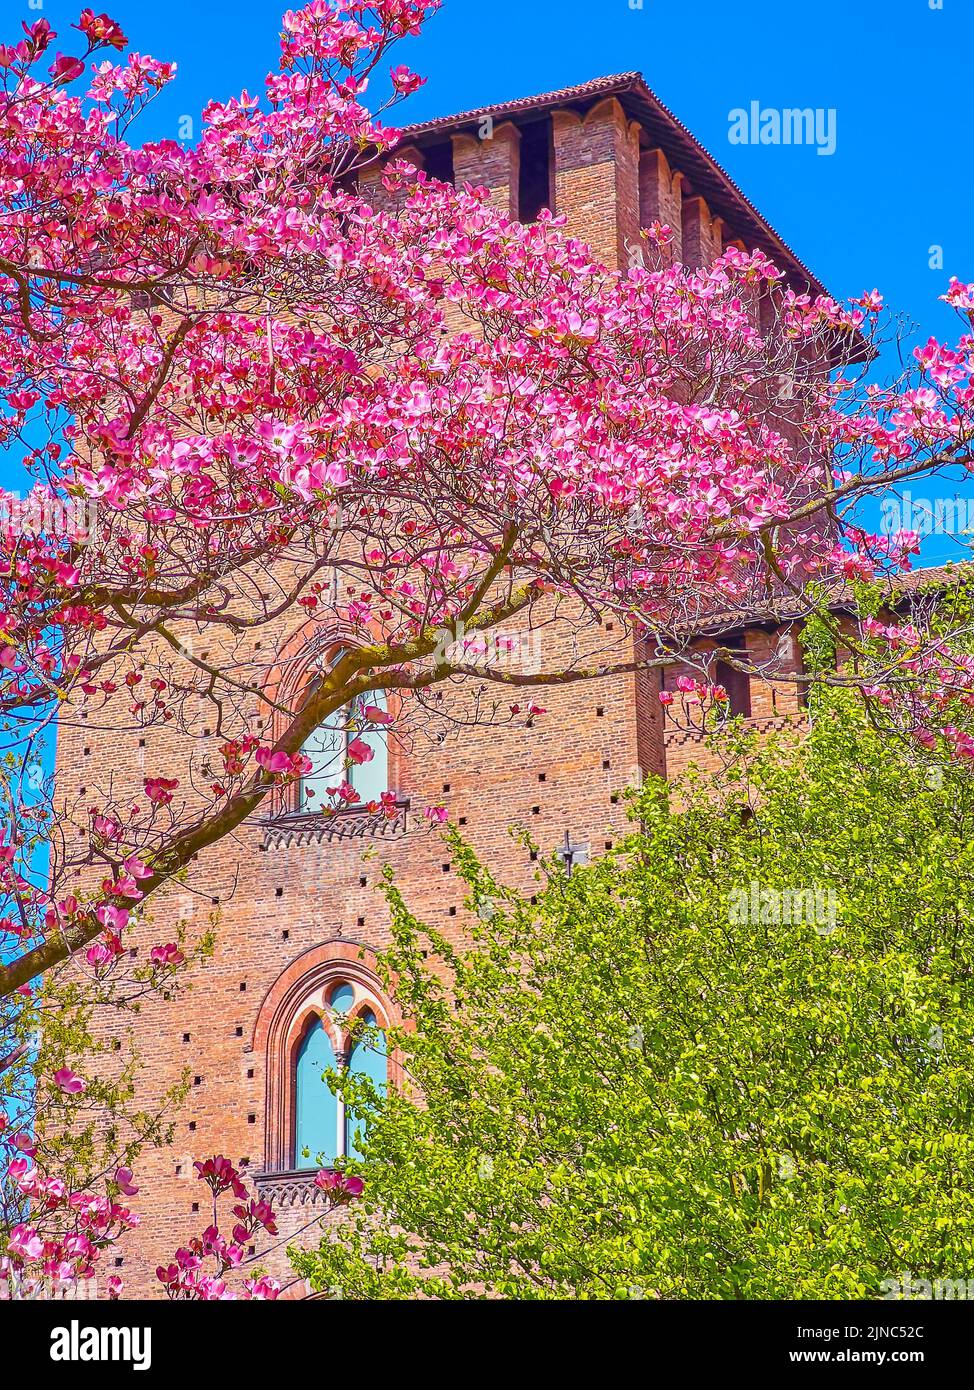 The bright pink flowers Cornus Florida tree and the brick tower of Visconti Castle on a windy day, Pavia, Italy Stock Photo